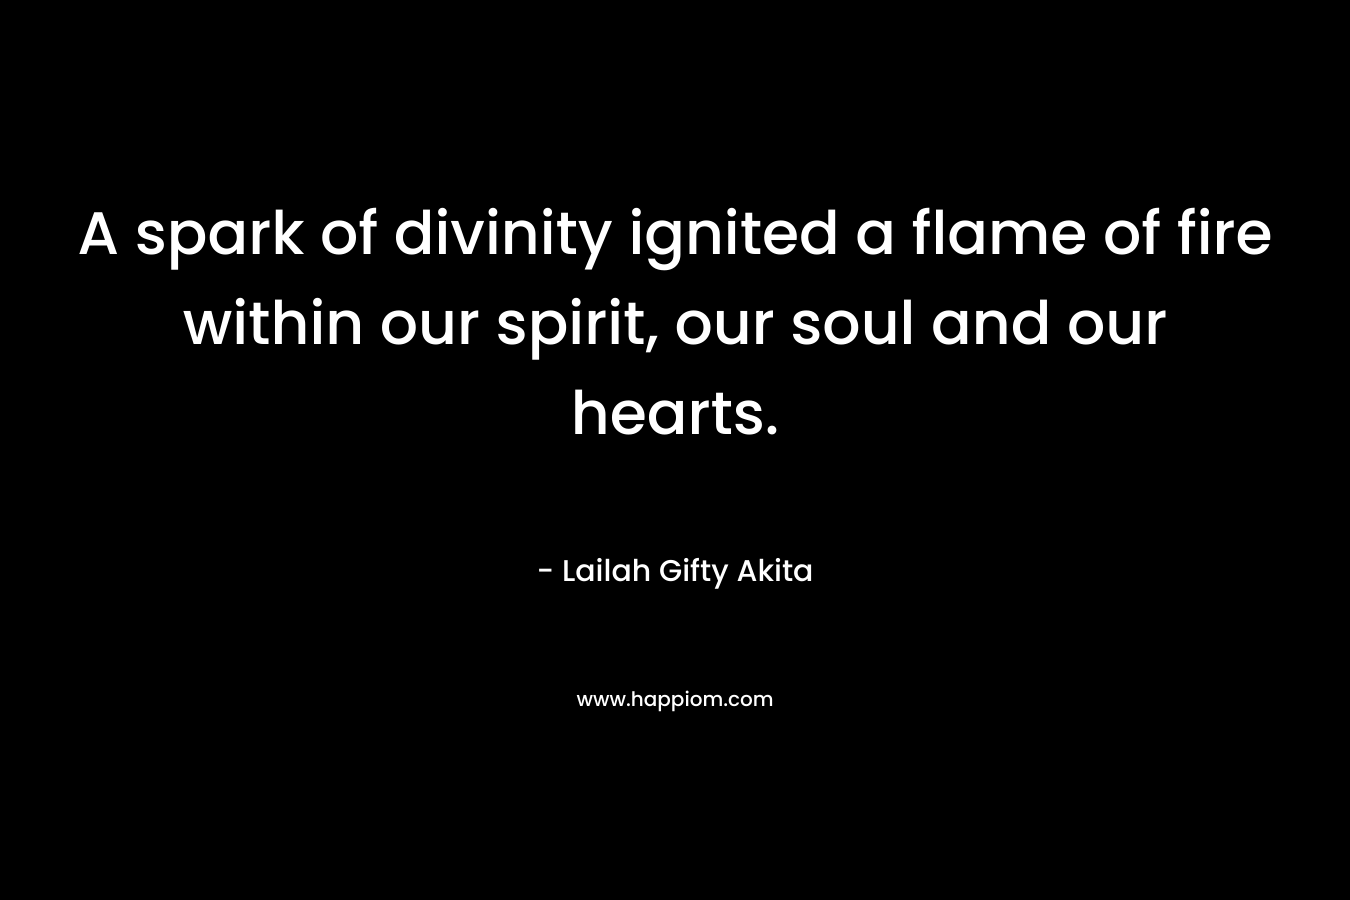 A spark of divinity ignited a flame of fire within our spirit, our soul and our hearts.